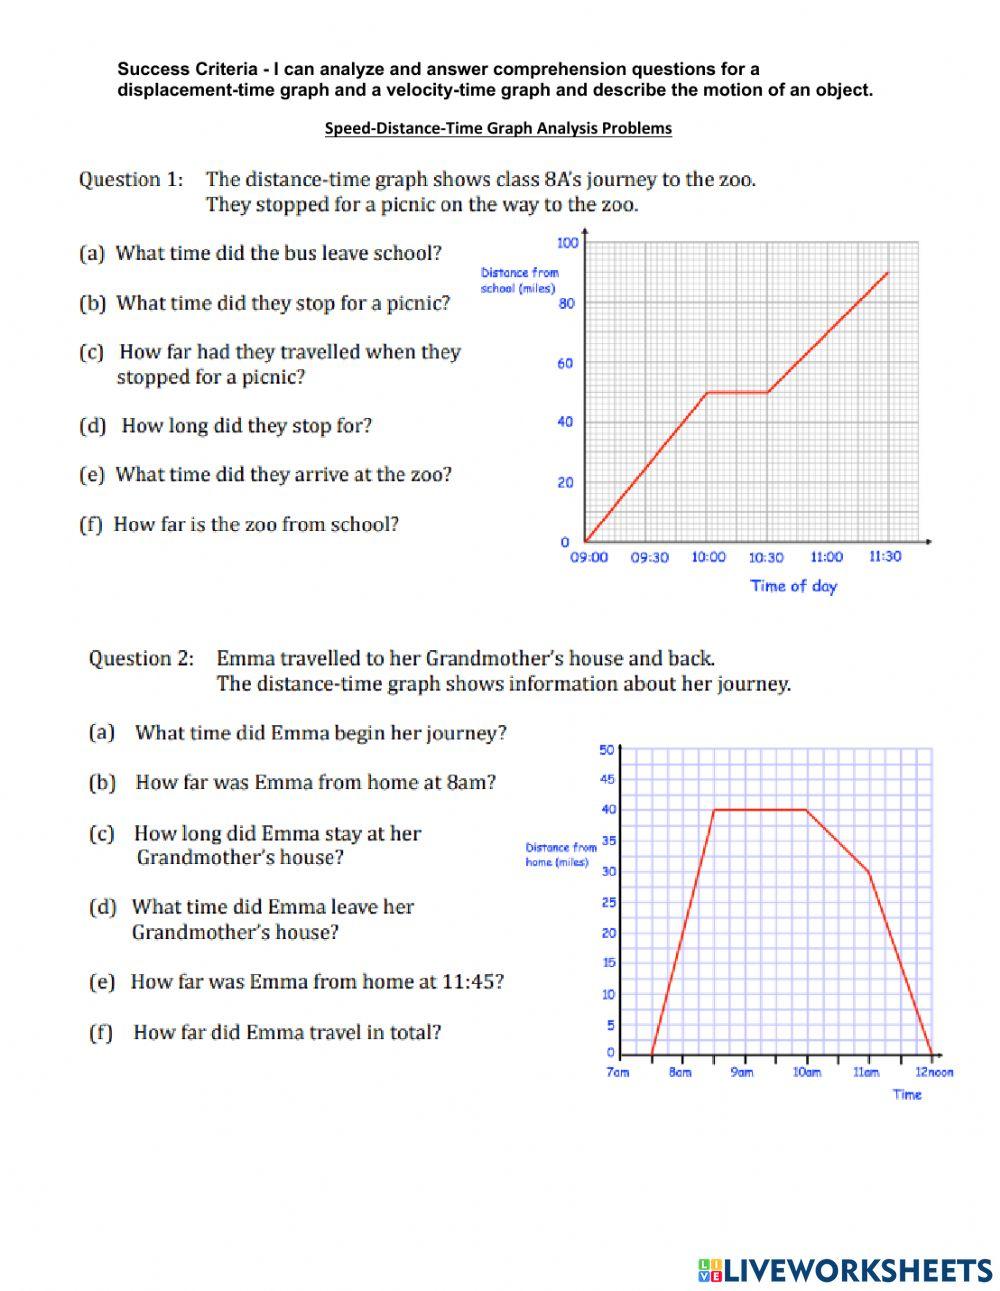 Comparing Distance/Time Graphs to Speed/Time Graphs Worksheet for 8th -  10th Grade